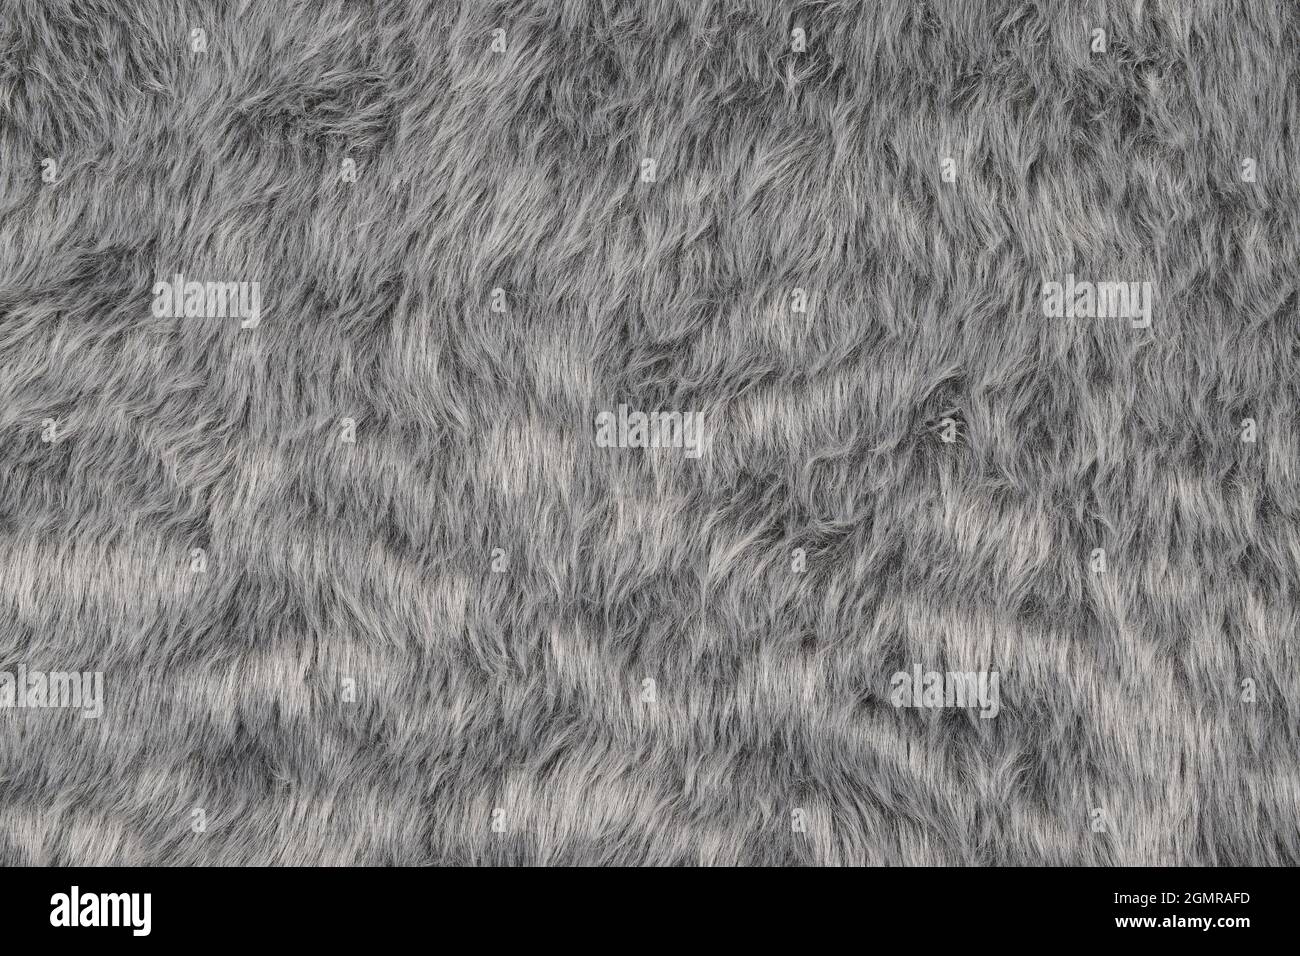 Gray fur texture background, top view of furry cloth pattern Stock Photo